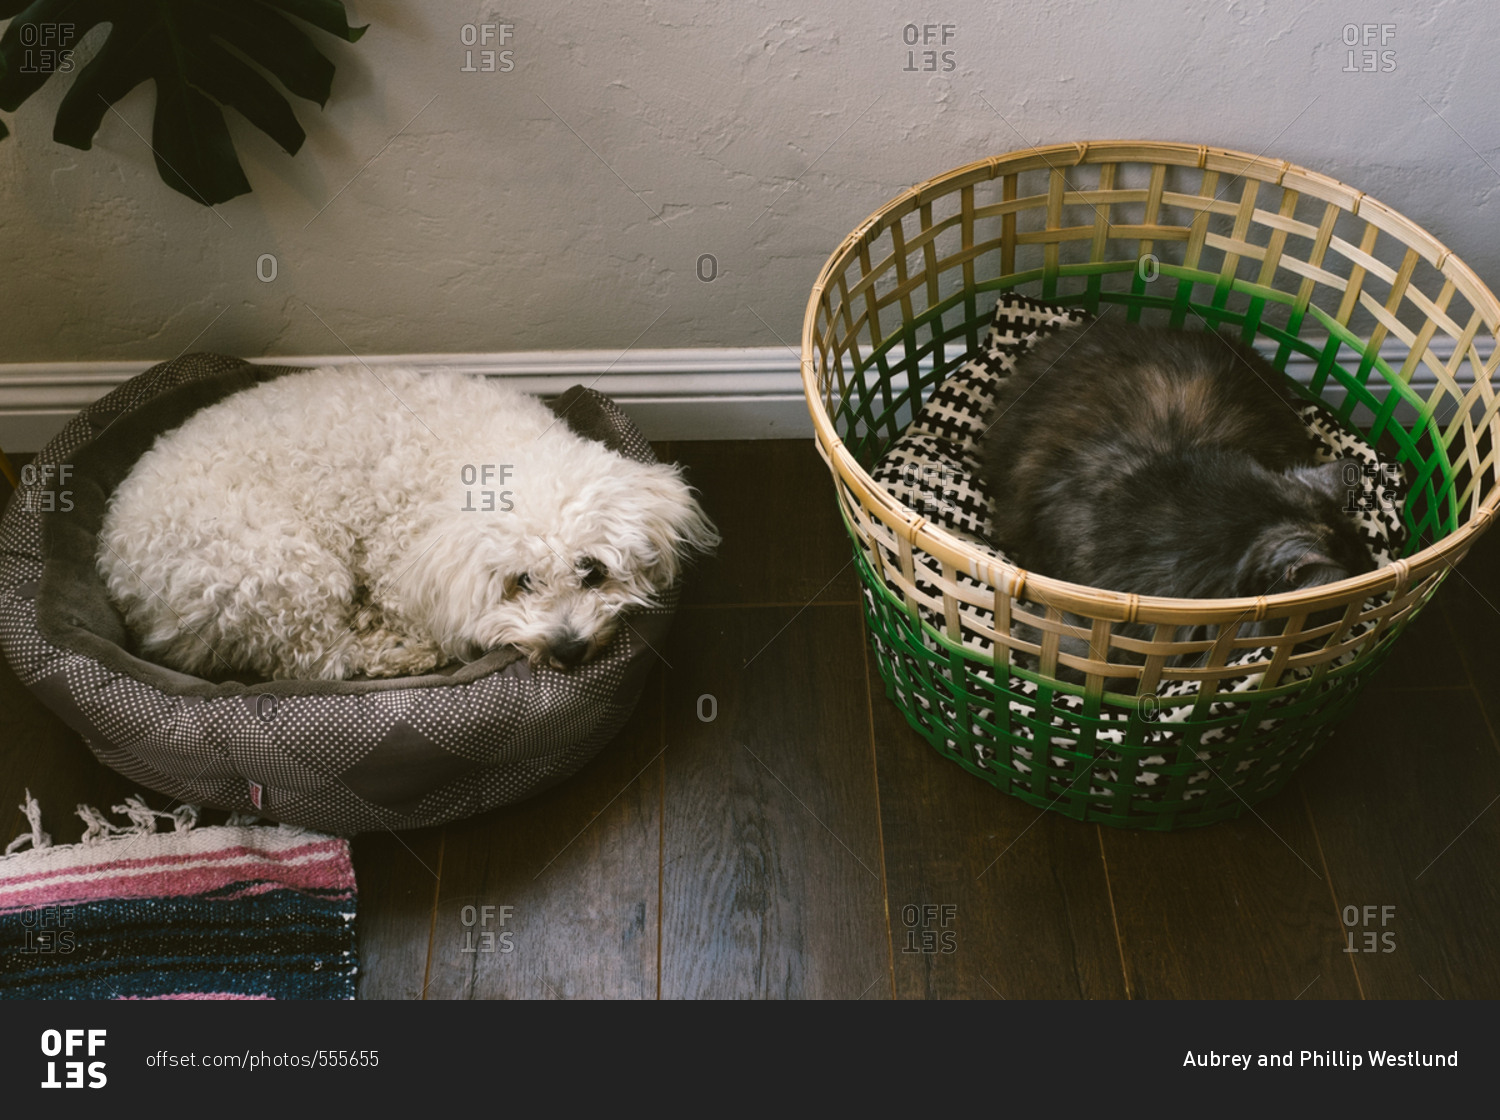 A dog and cat sleeping in beds next to each other